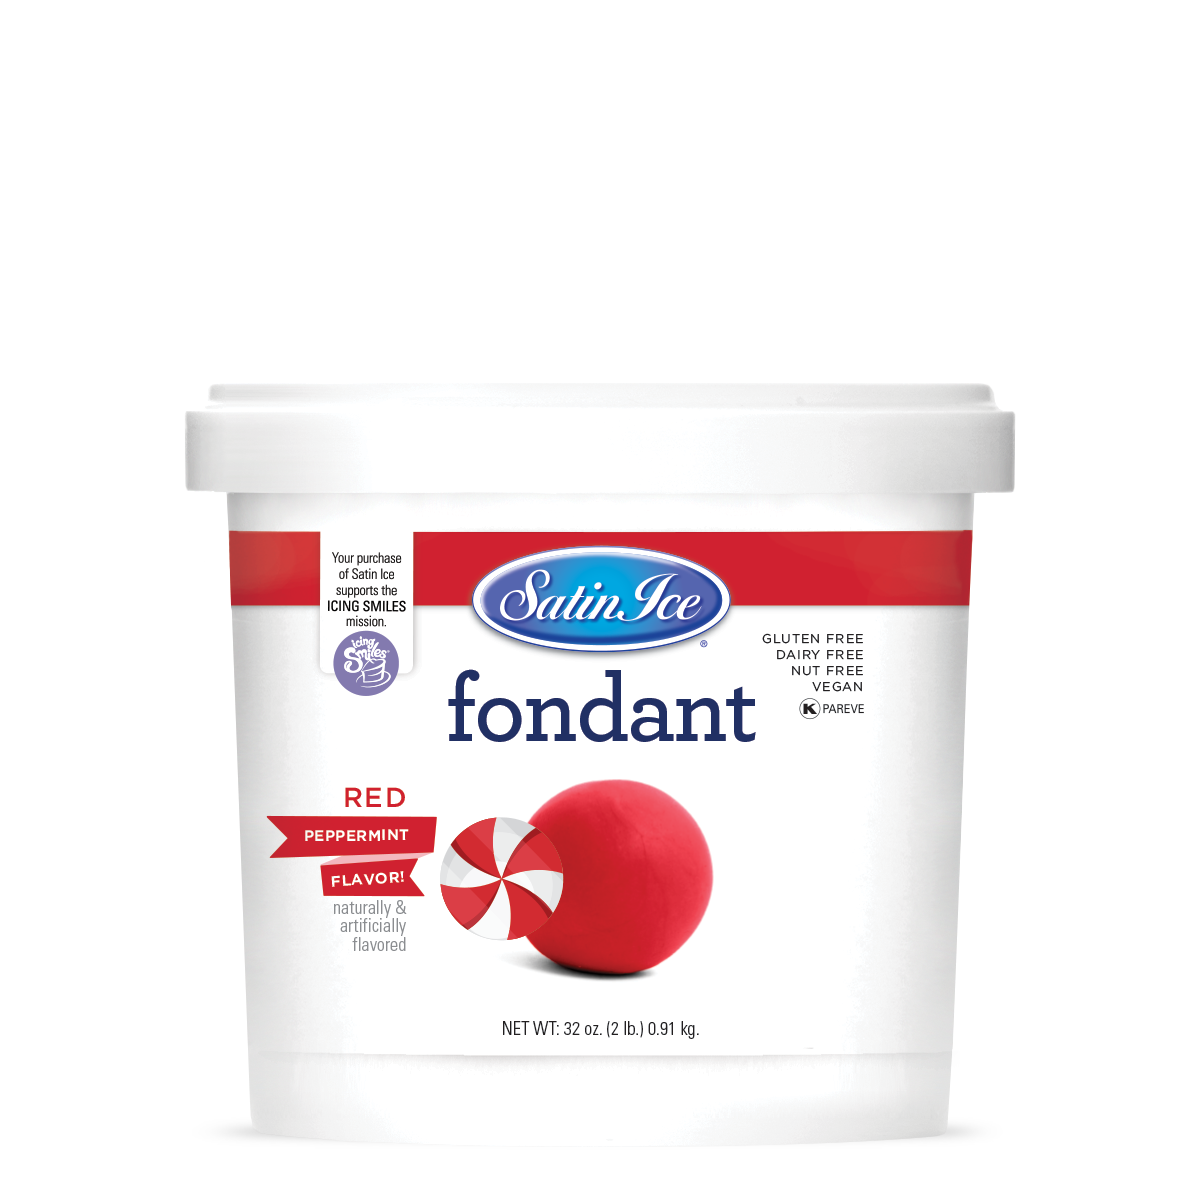 Satin Ice Red Peppermint Flavored Fondant - 2lb